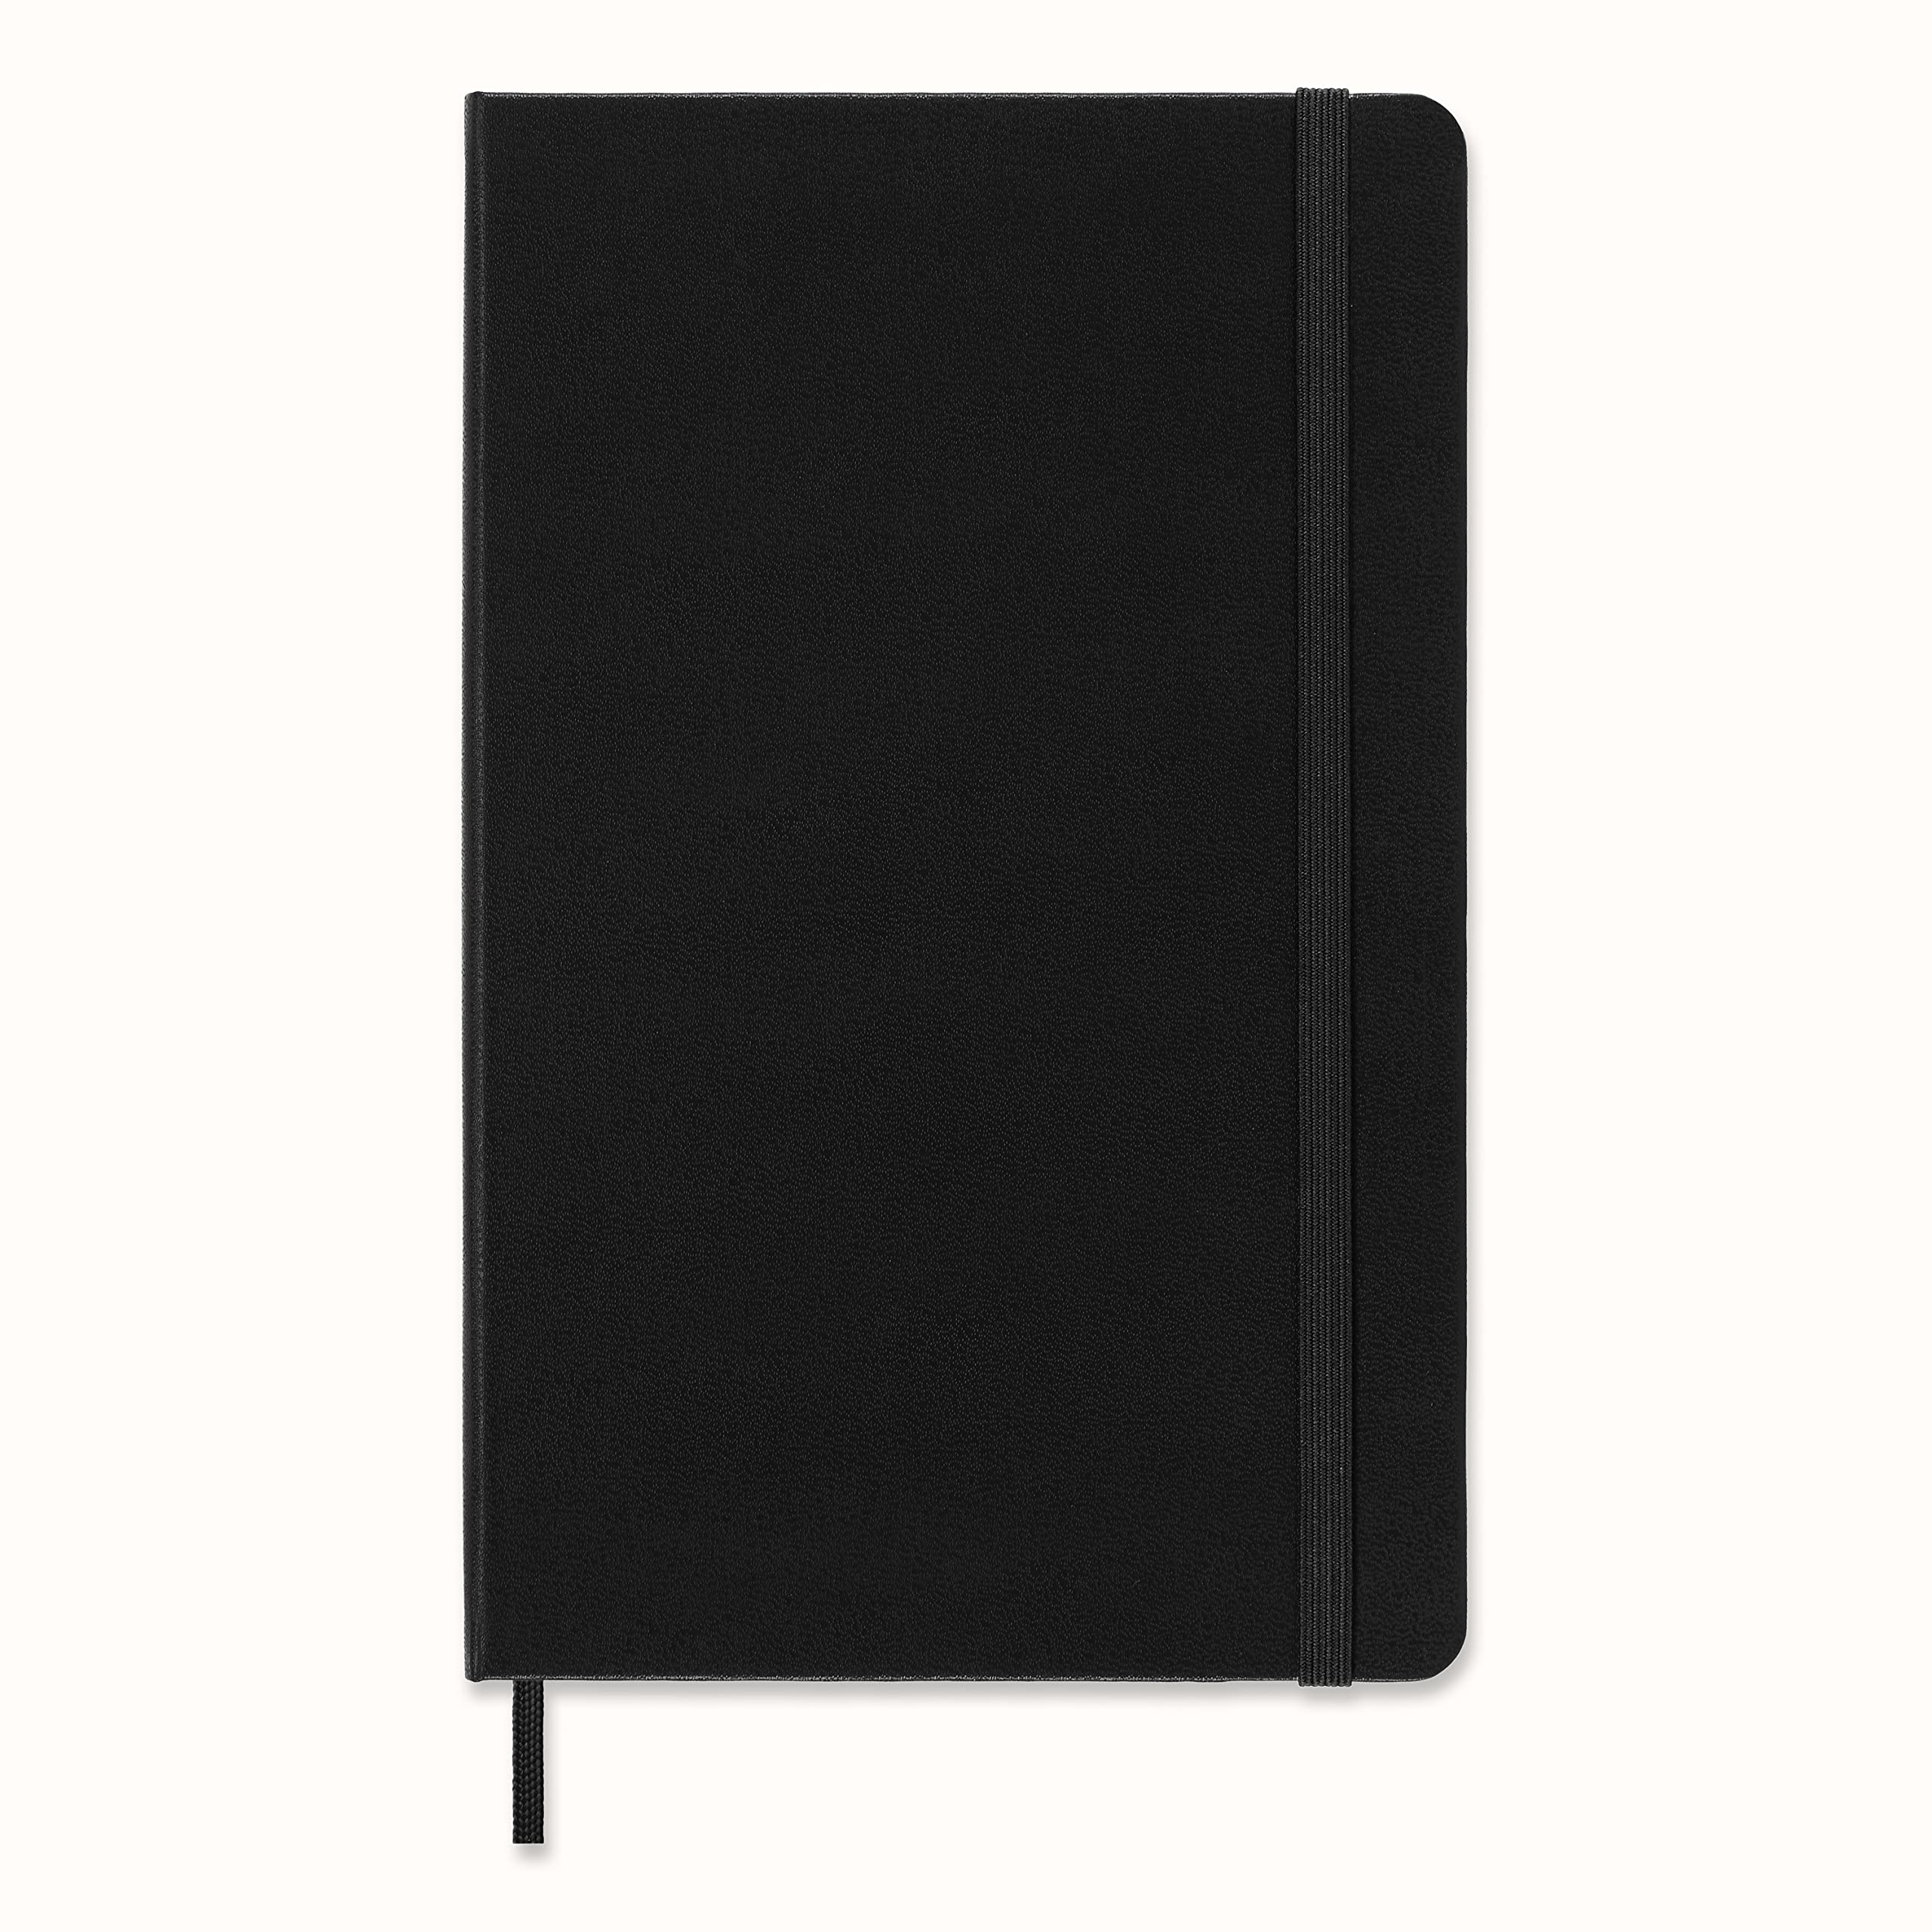 Book Cover Moleskine Classic Notebook, Hard Cover, Large (5